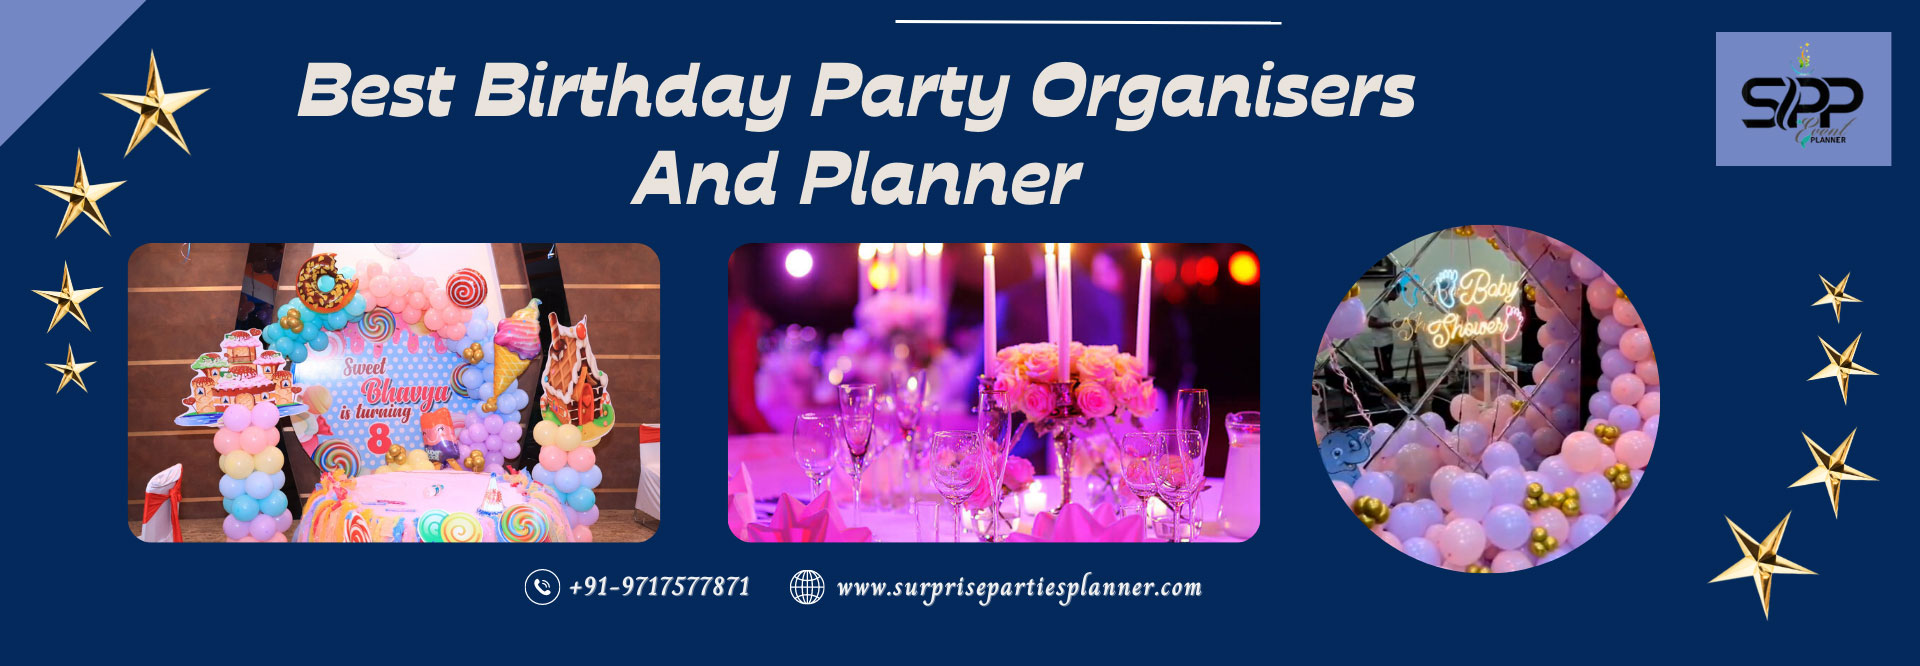 Best Birthday Party Organisers And Planner